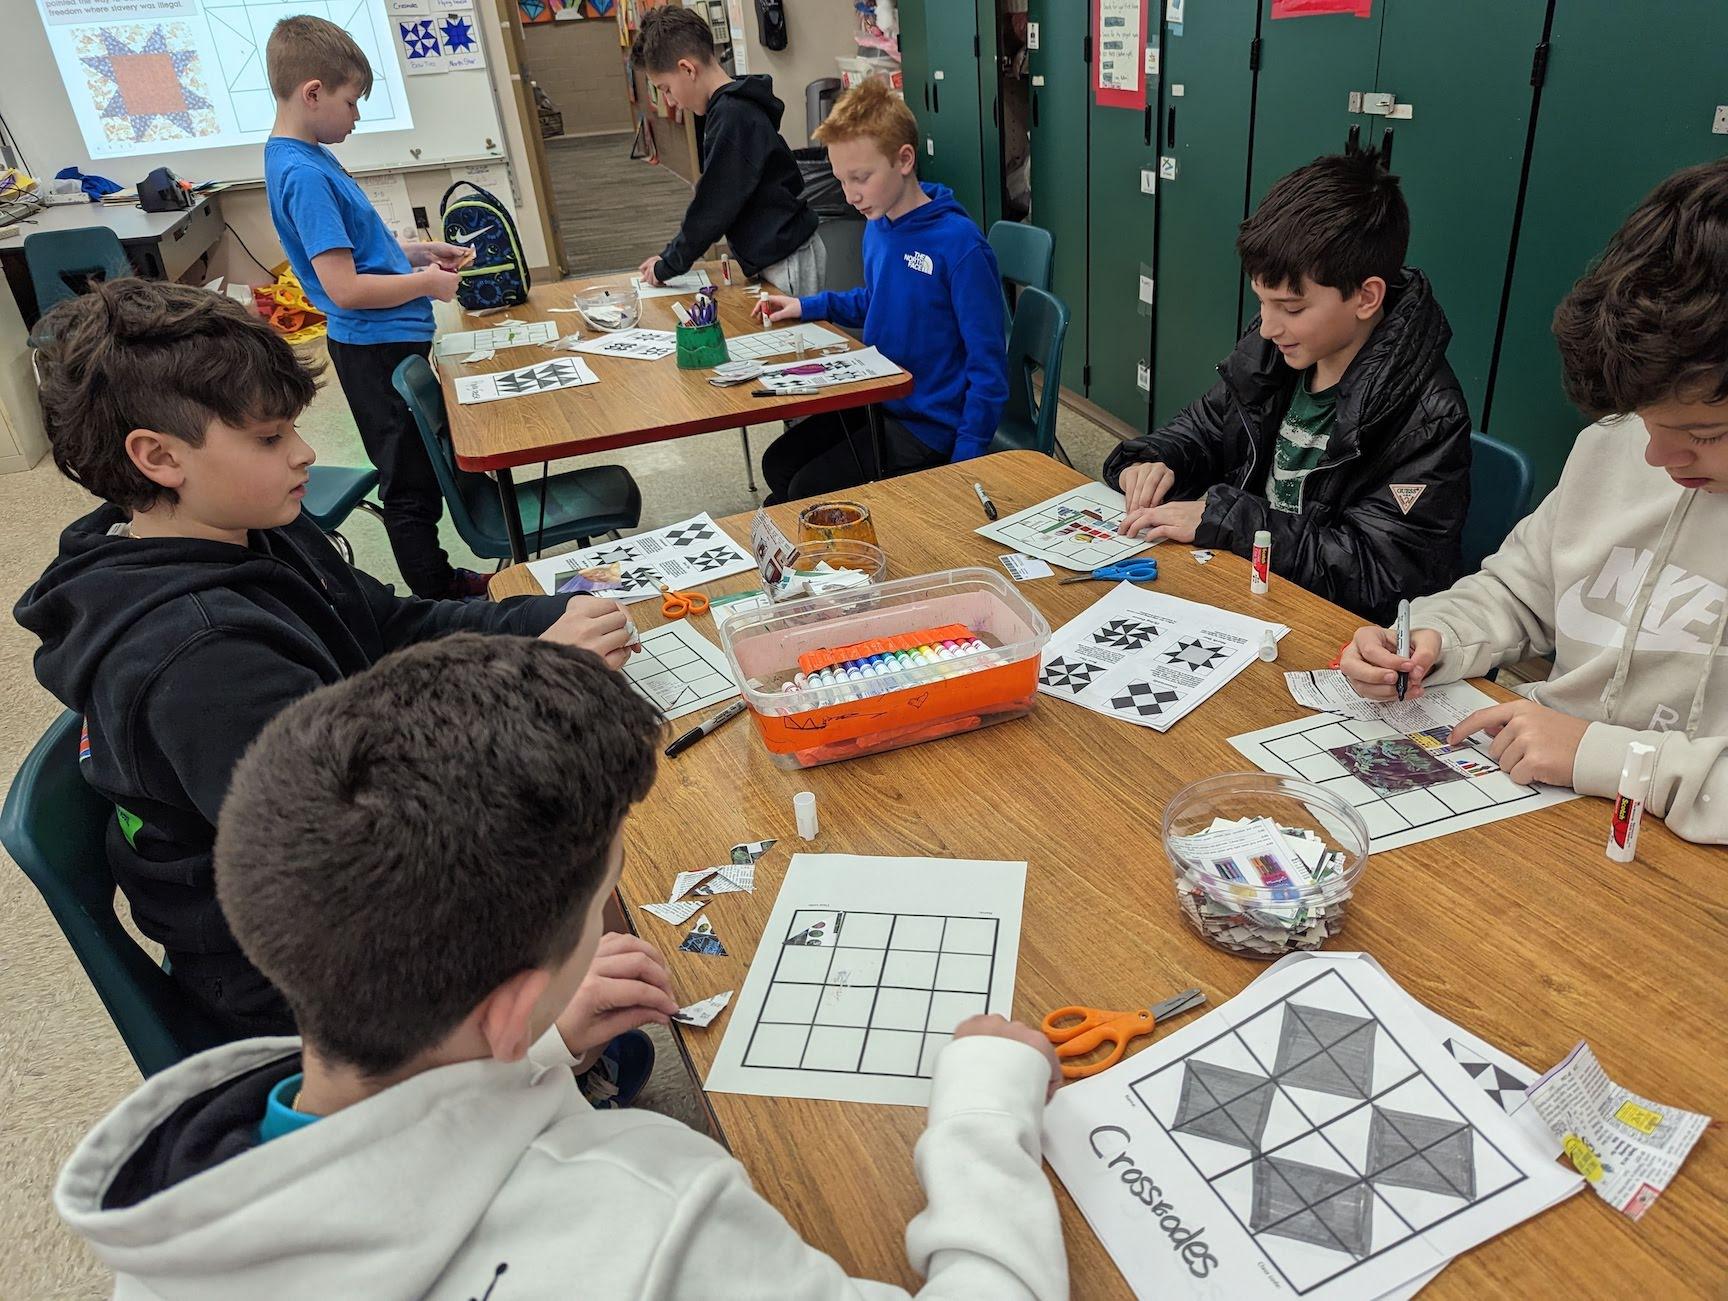 Level Green 5th and 6th-graders Aiden Crawford, Maddox Abbott-Foreback, Miles Johnson, Nathan Goldberg, Antonio Caruso, Sloan Simpson, and Jackson Carr create a collage quilt using grids